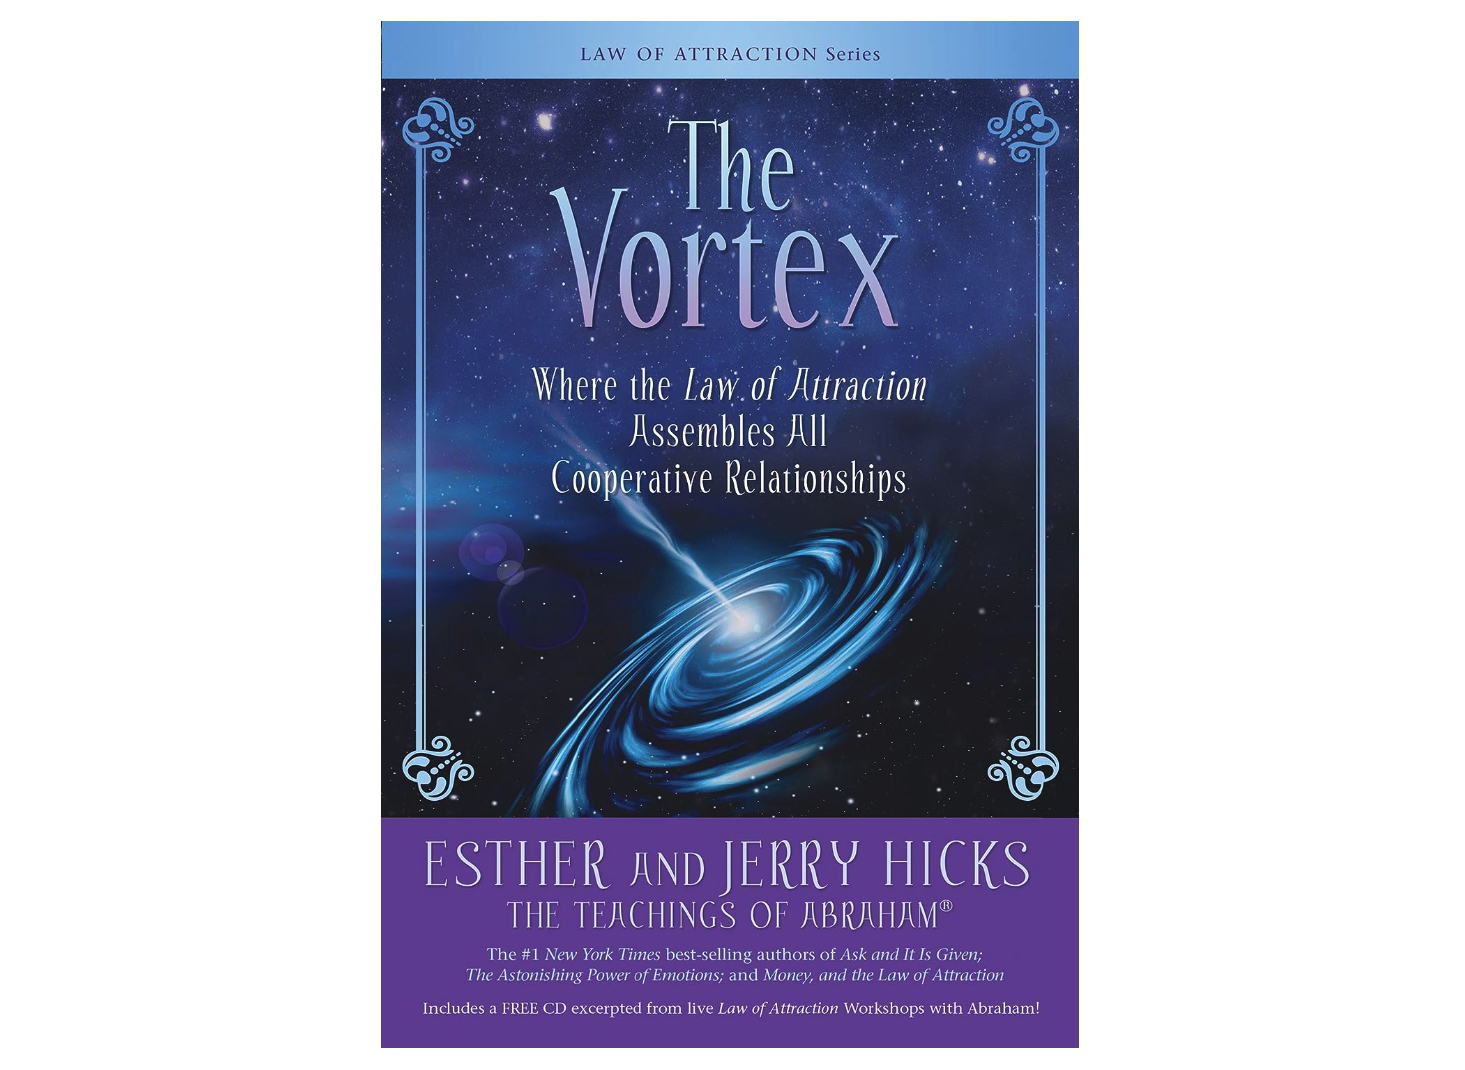 Book Review: The Vortex – Where the Law of Attraction Assembles All Cooperative Relationships